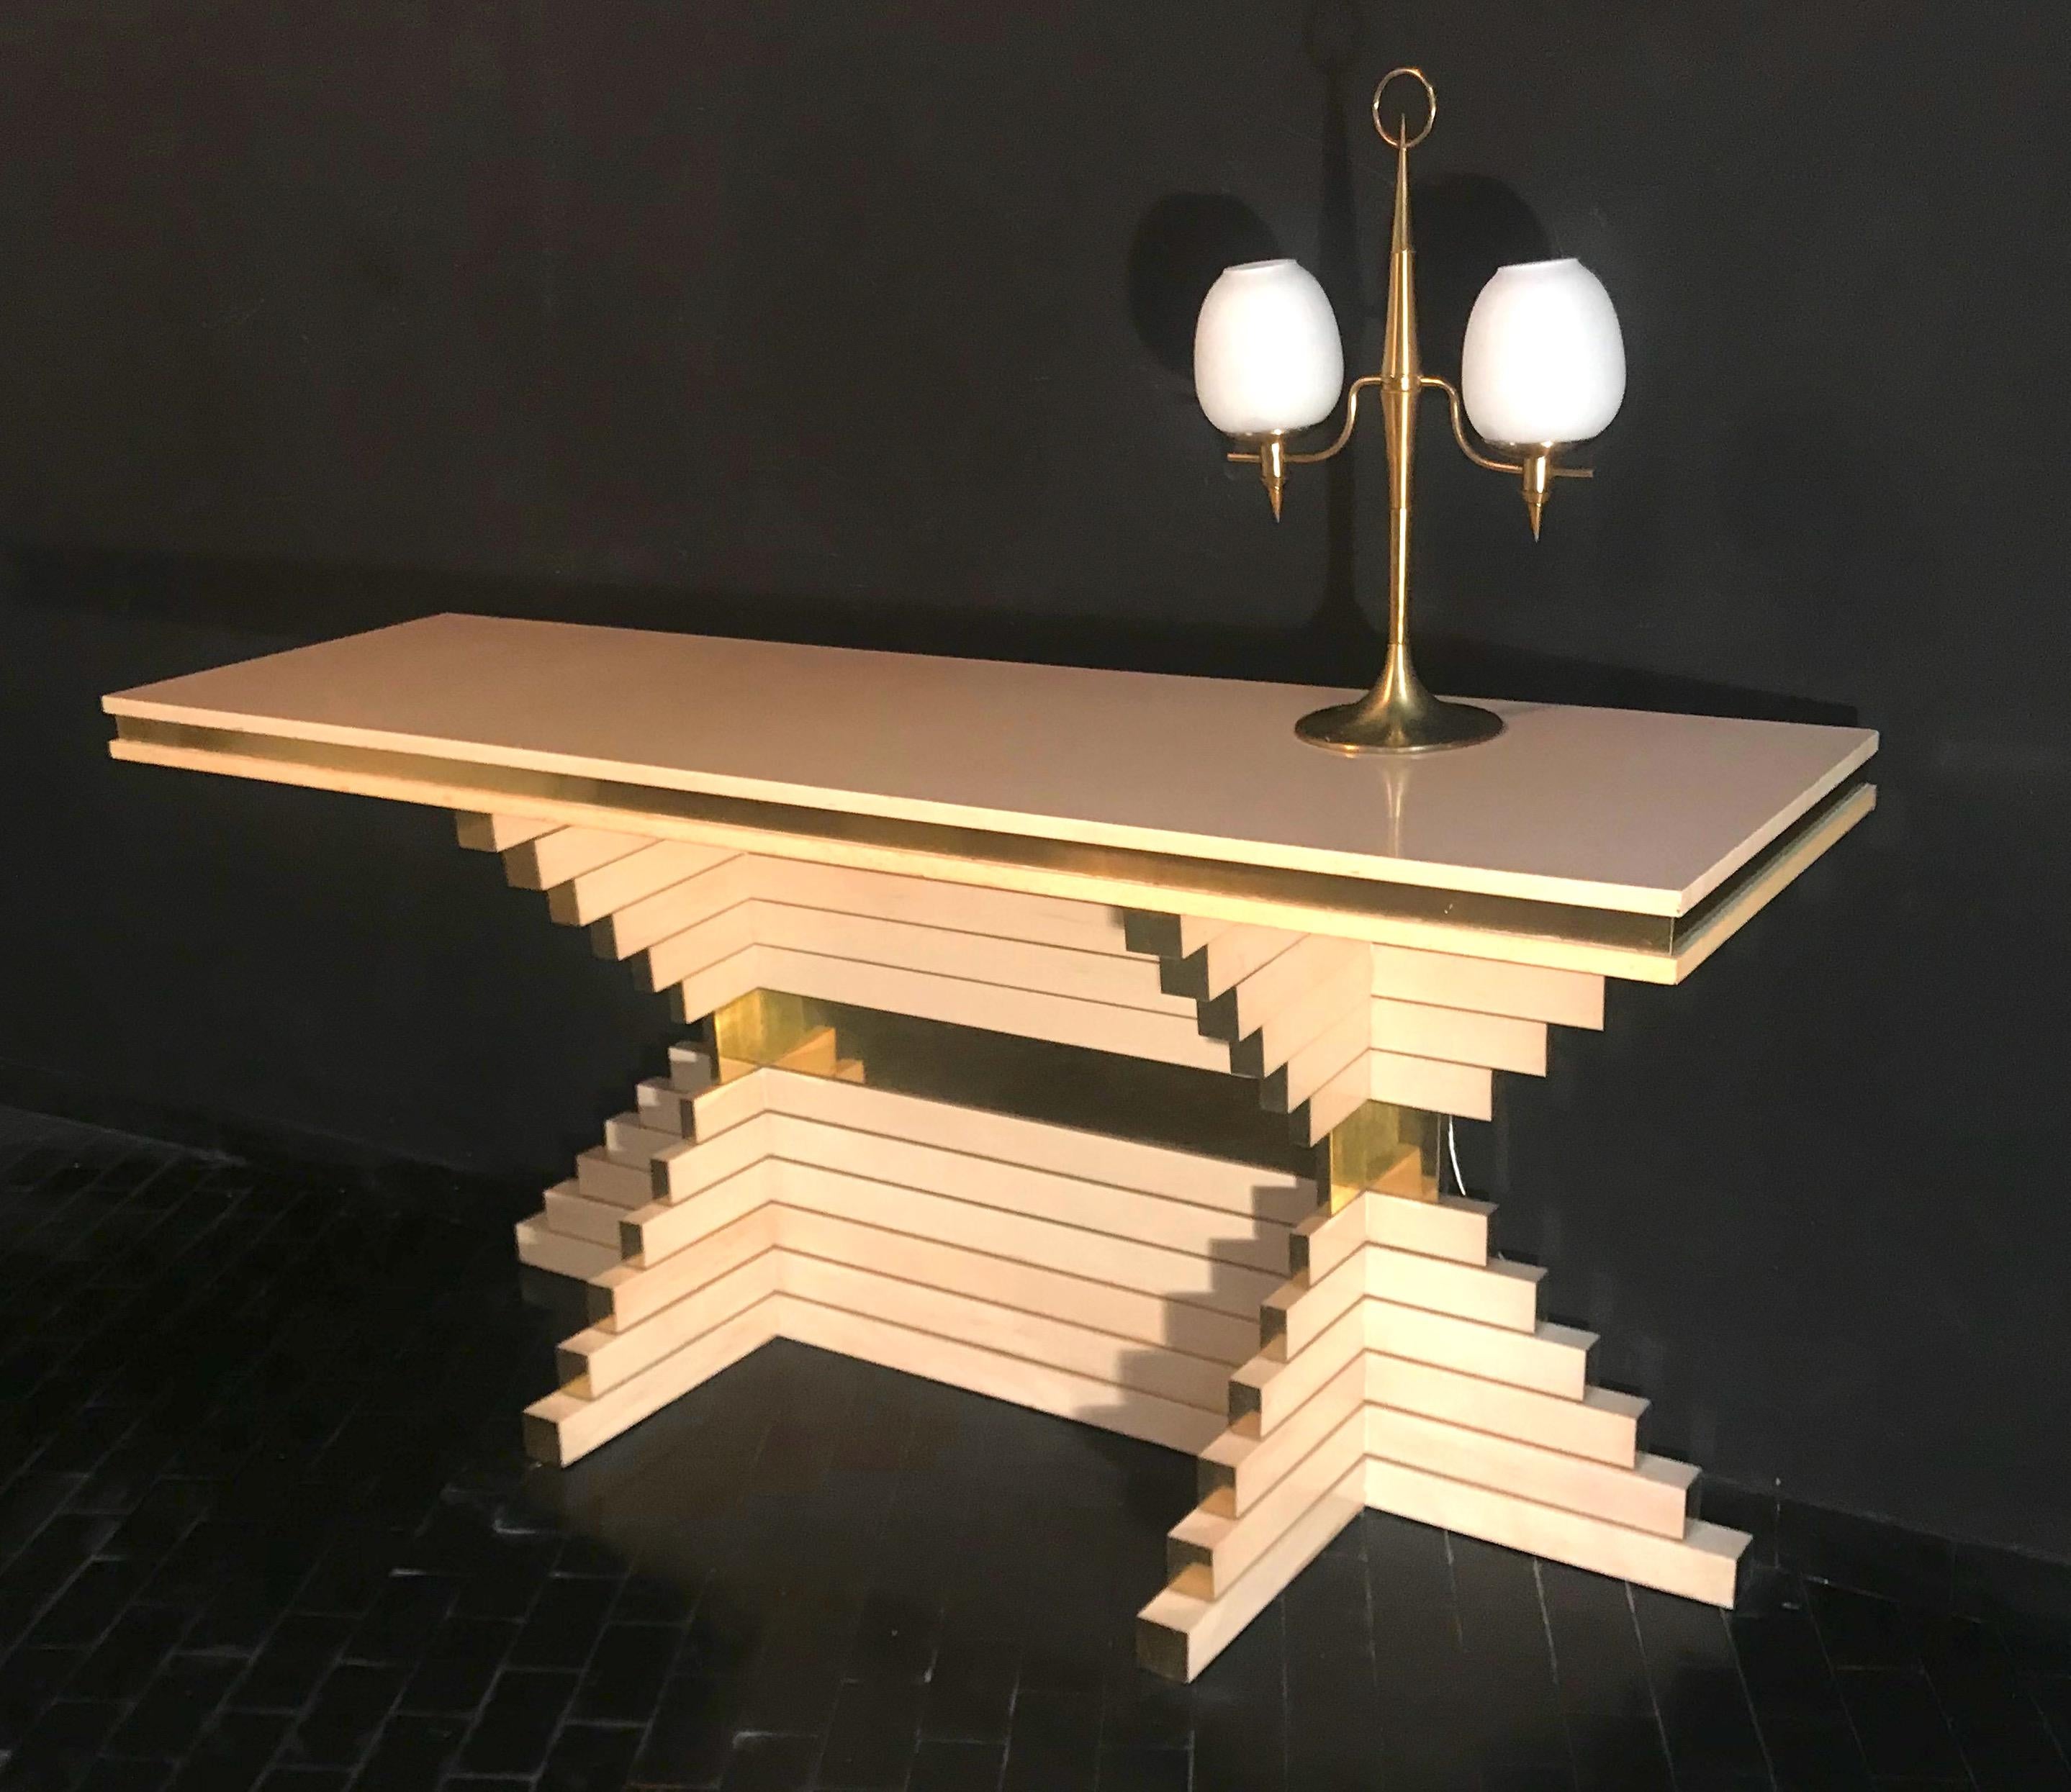 One of a kind outstanding console table designed by Alain Delon for Maison Jansen, it features a skyscraper style silhouette with its gorgeous stacked obtuse form. This console features ivory lacquer finish with brass banding and